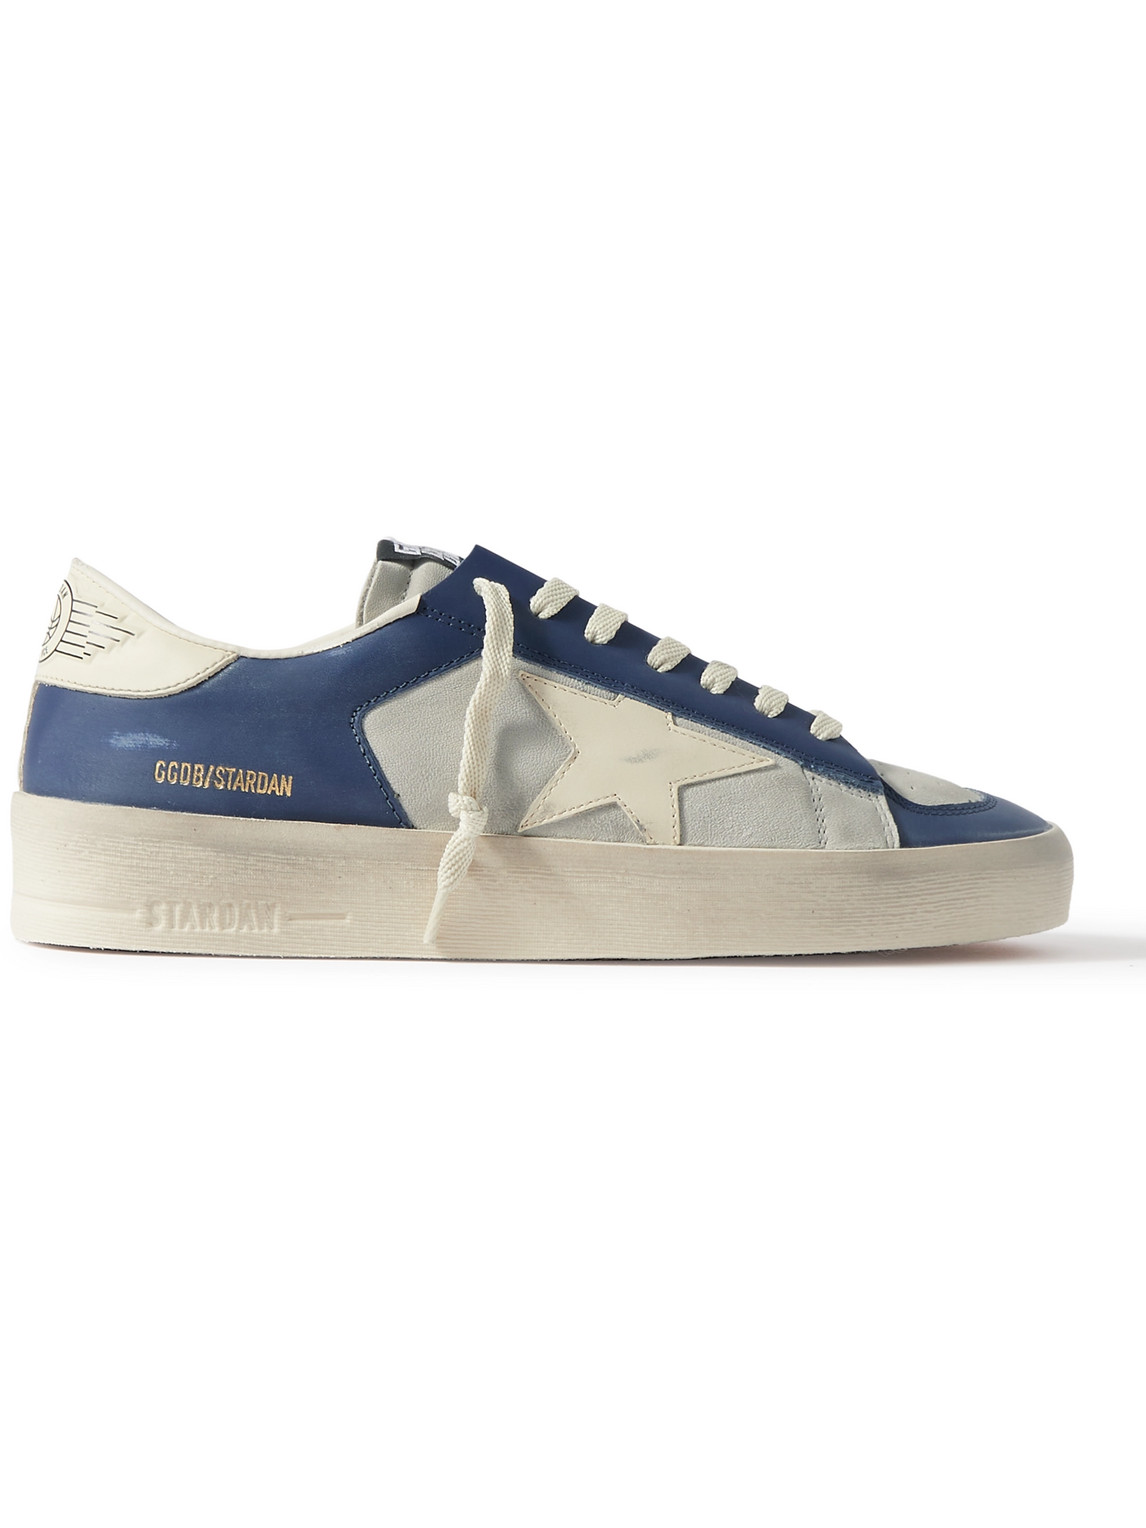 Golden Goose Stardan Distressed Colour-block Leather Trainers In Blue